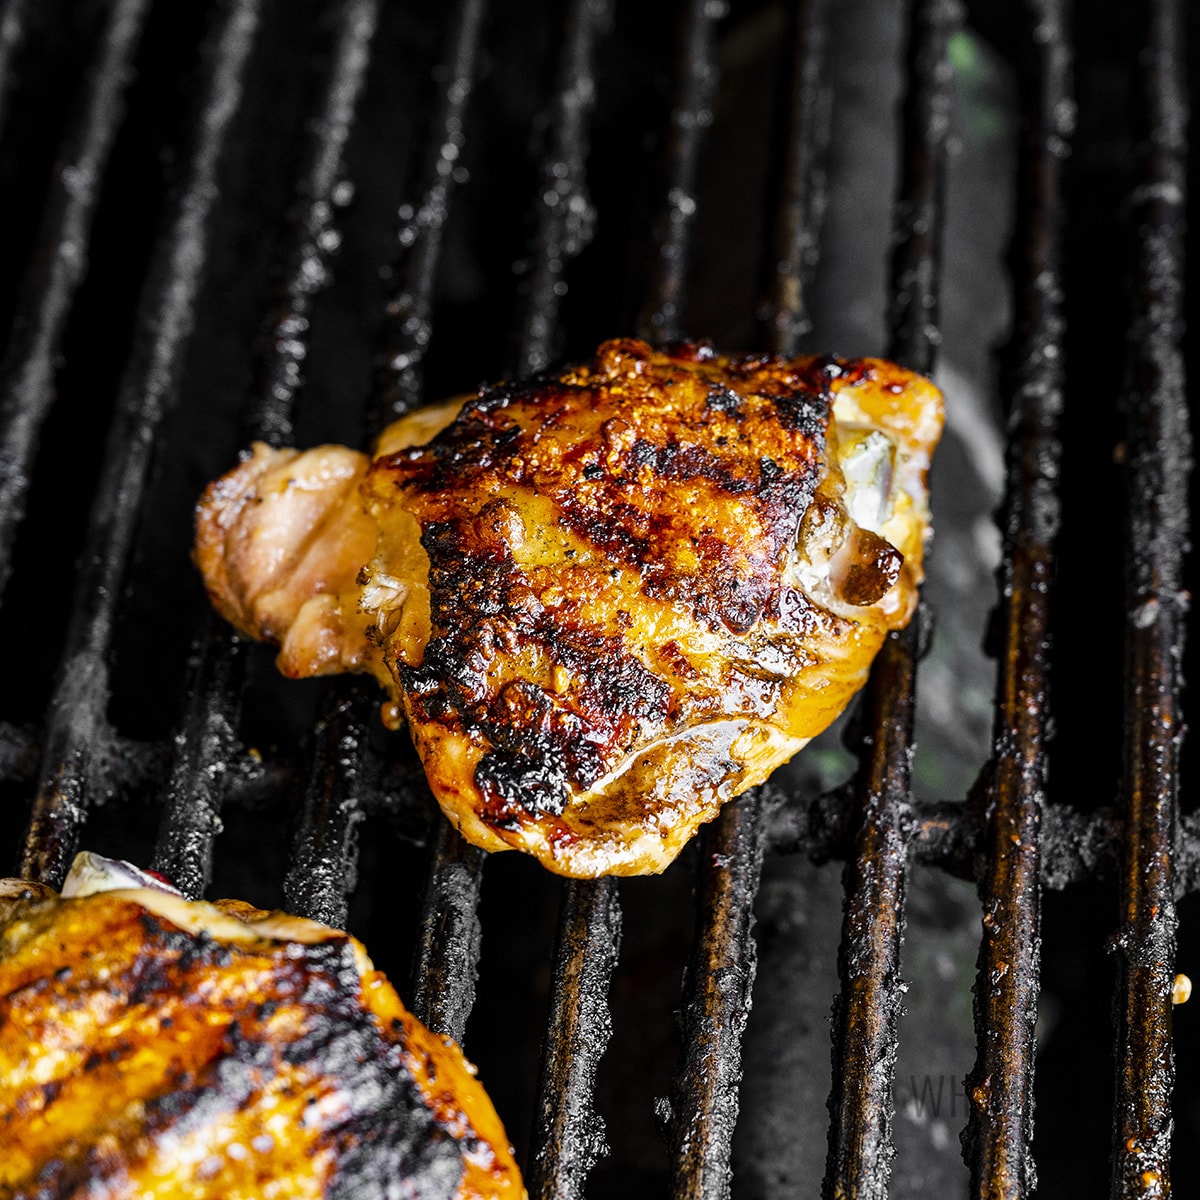 Bone-in chicken thighs on the grill.